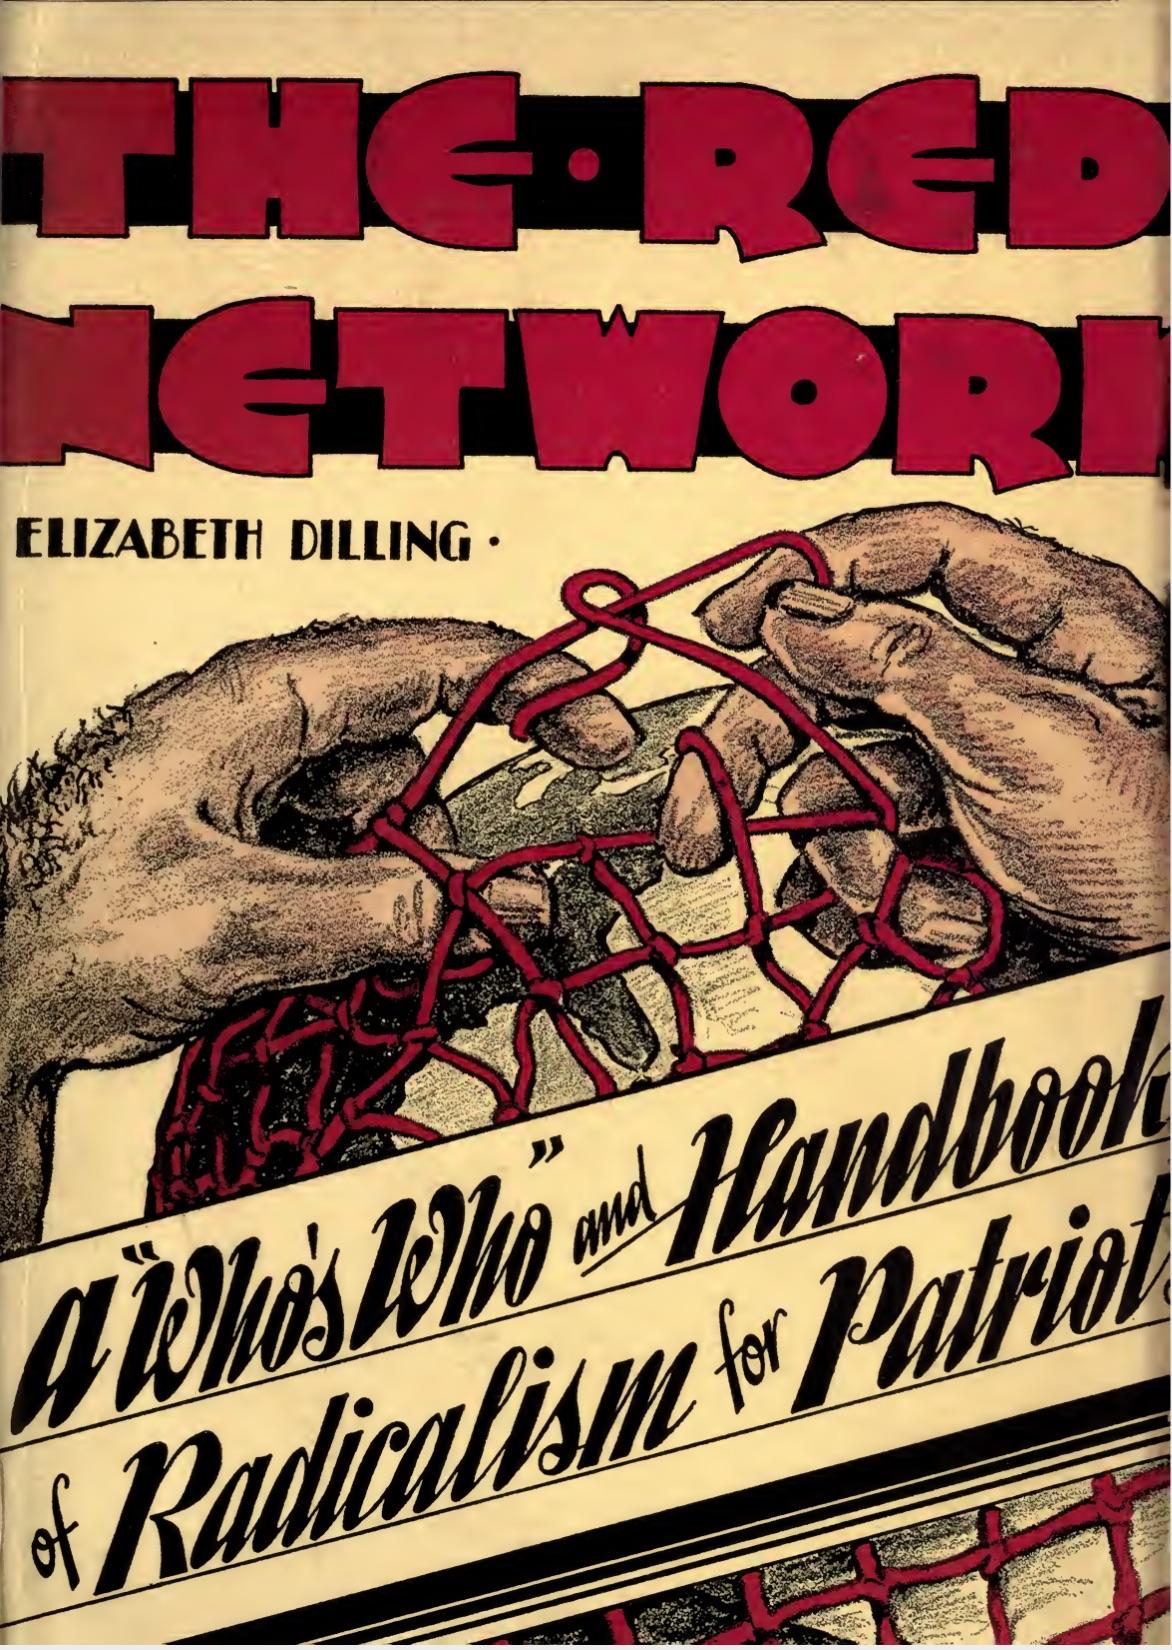 The Red Network; A Who's Who and Handbook of Radicalism for Patriots (1934) by Elizabeth Kirkpatrick Dilling, 1894-1966